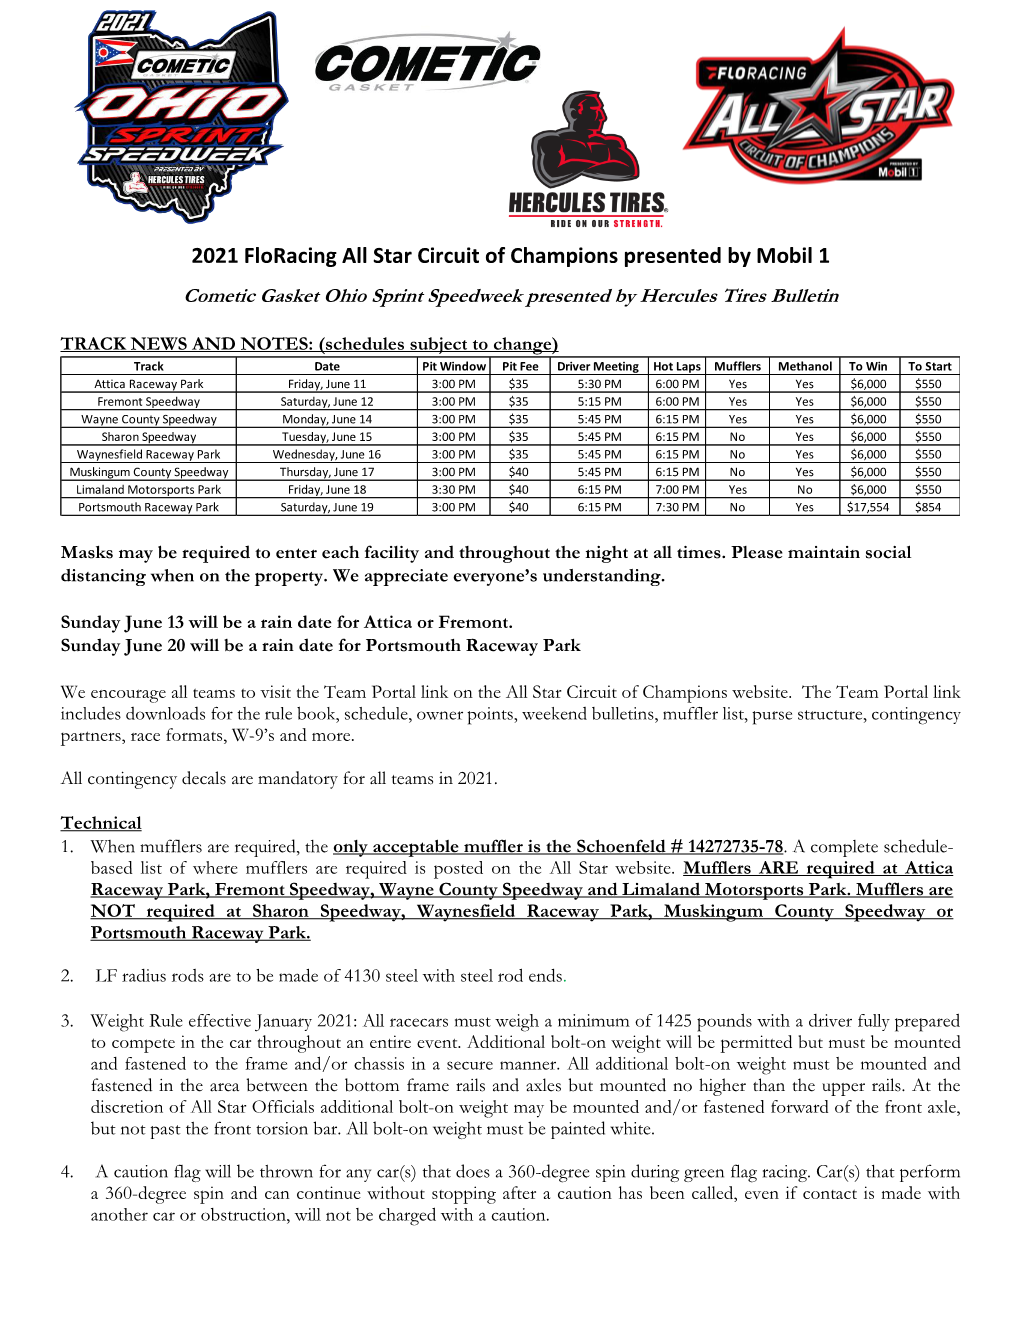 2021 Floracing All Star Circuit of Champions Presented by Mobil 1 Cometic Gasket Ohio Sprint Speedweek Presented by Hercules Tires Bulletin